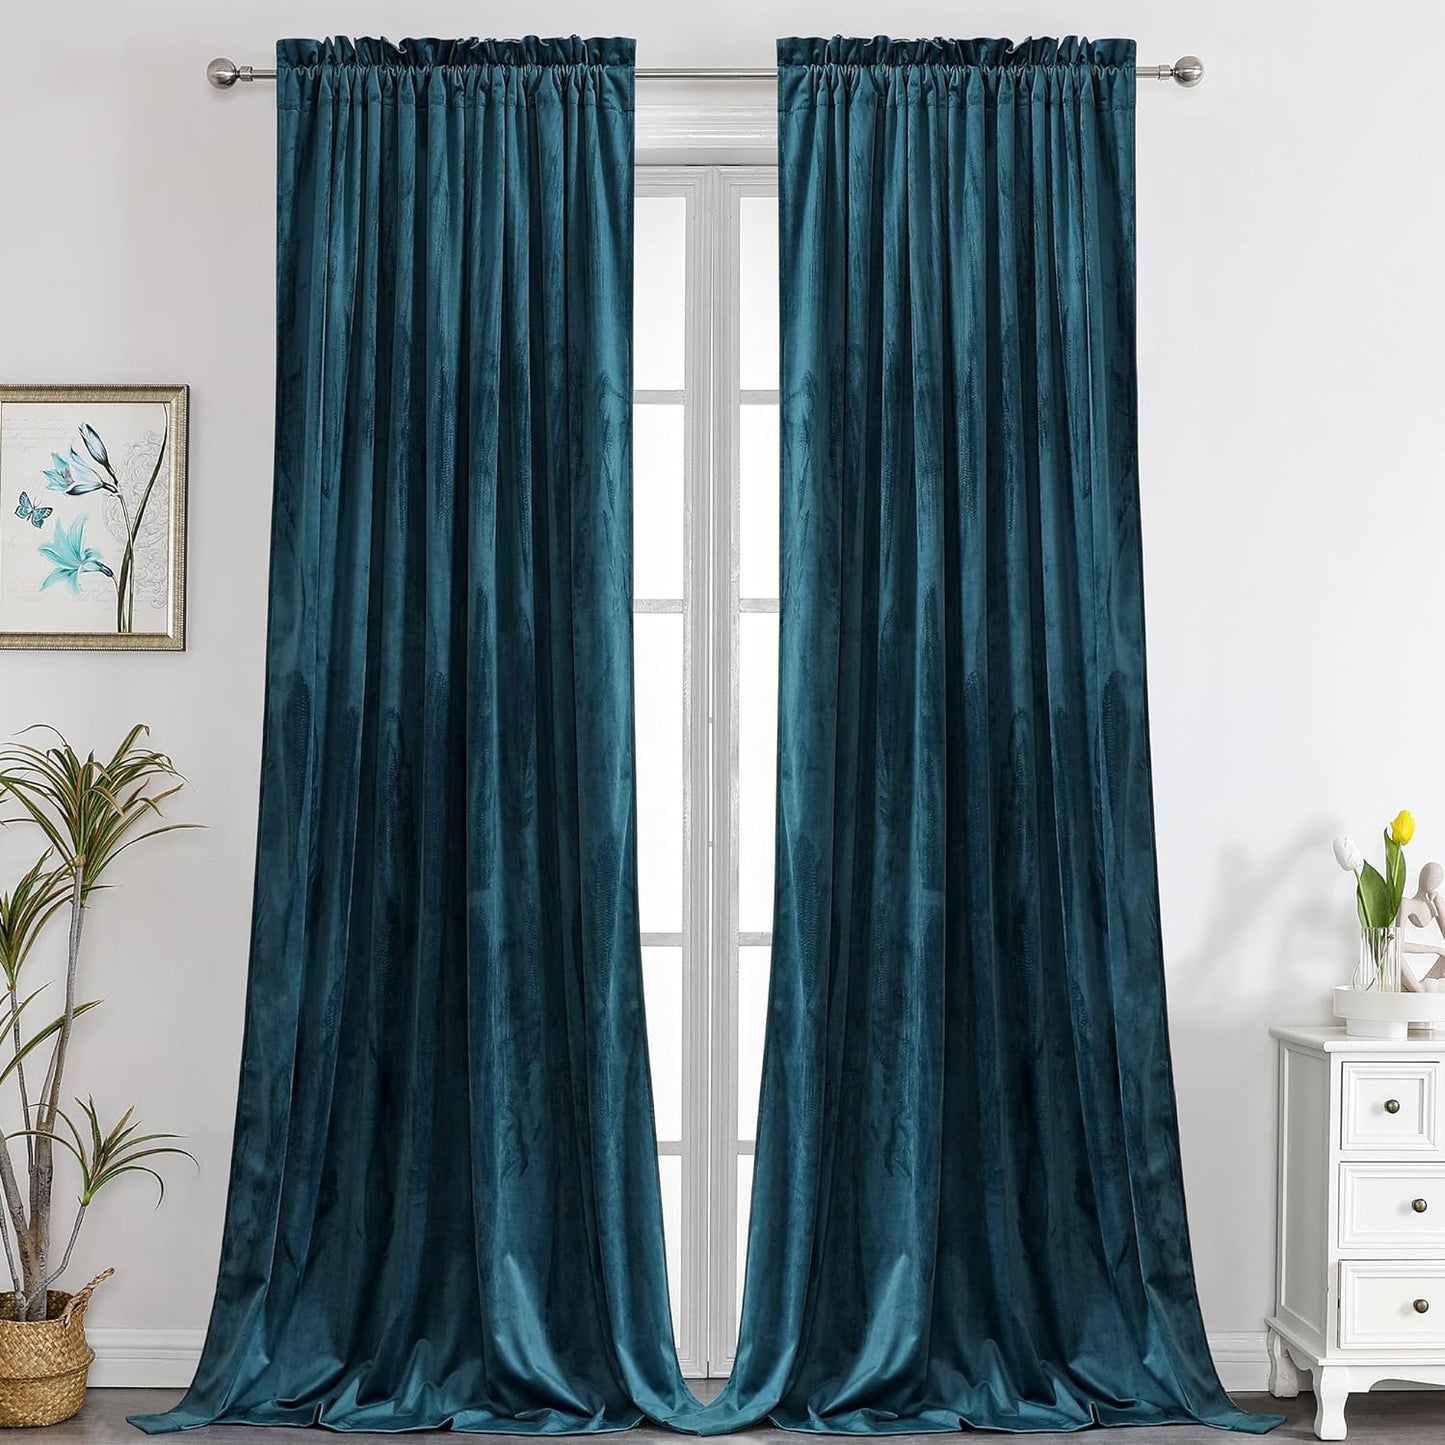 Benedeco Green Velvet Curtains for Bedroom Window, Super Soft Luxury Drapes, Room Darkening Thermal Insulated Rod Pocket Curtain for Living Room, W52 by L84 Inches, 2 Panels  Benedeco Deepteal W52 * L120 | 2 Panels 